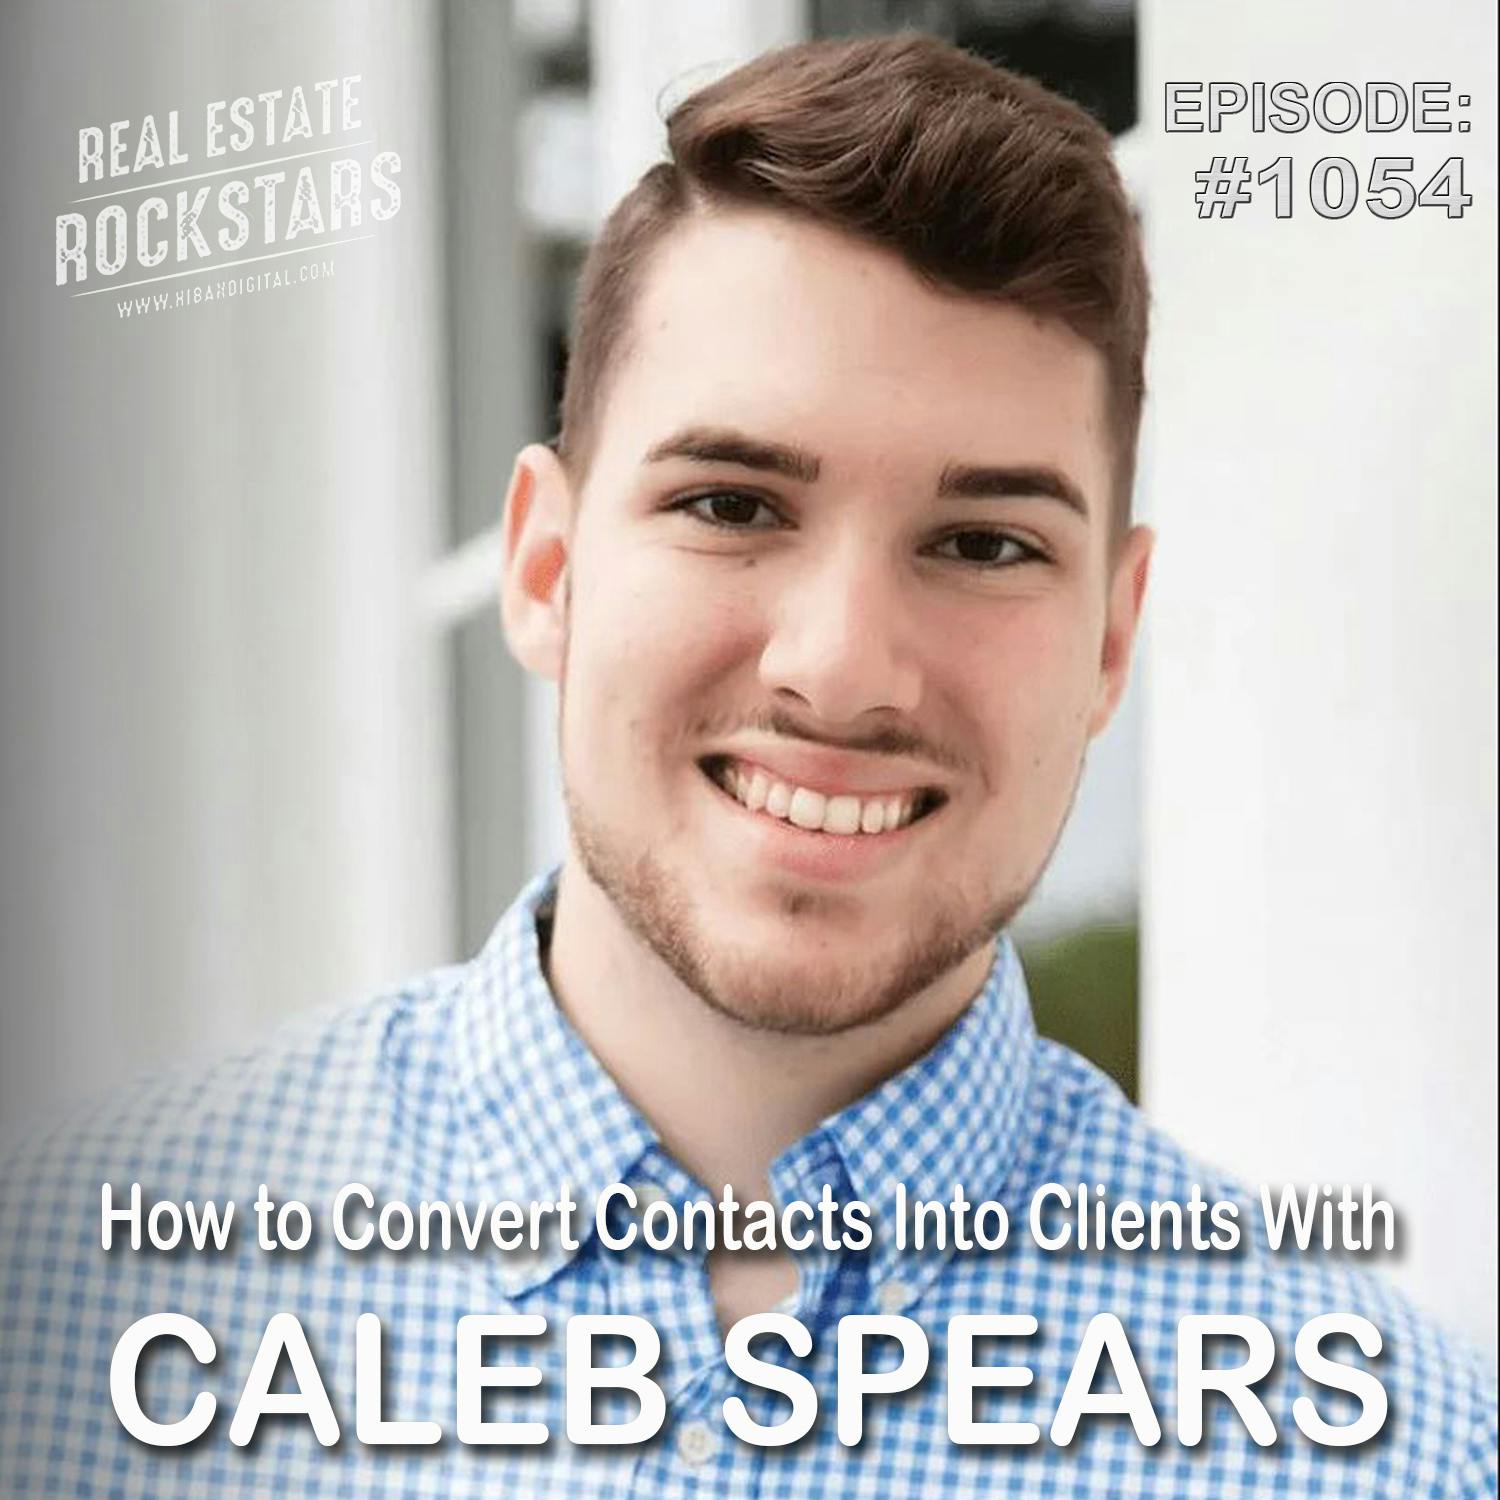 1054: How to Convert Contacts Into Clients With Caleb Spears